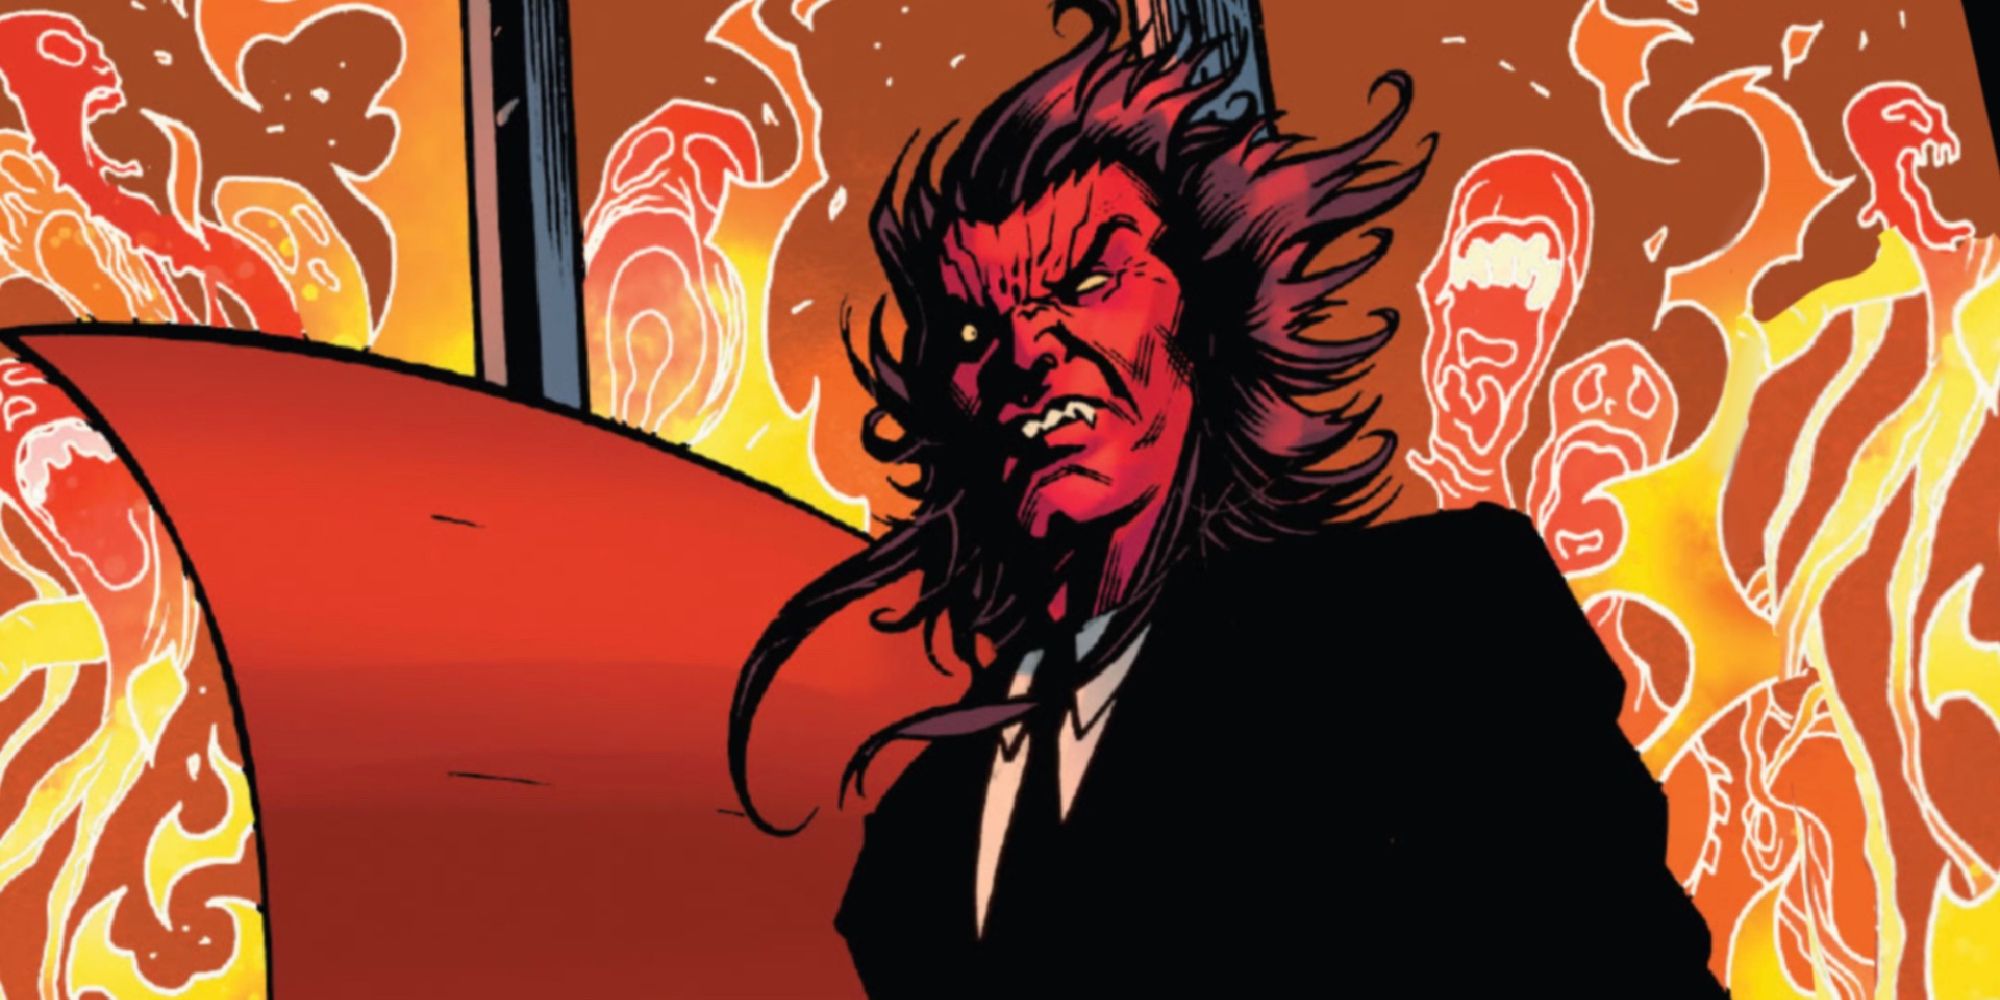 Mephisto wearing a suit from Marvel Comics